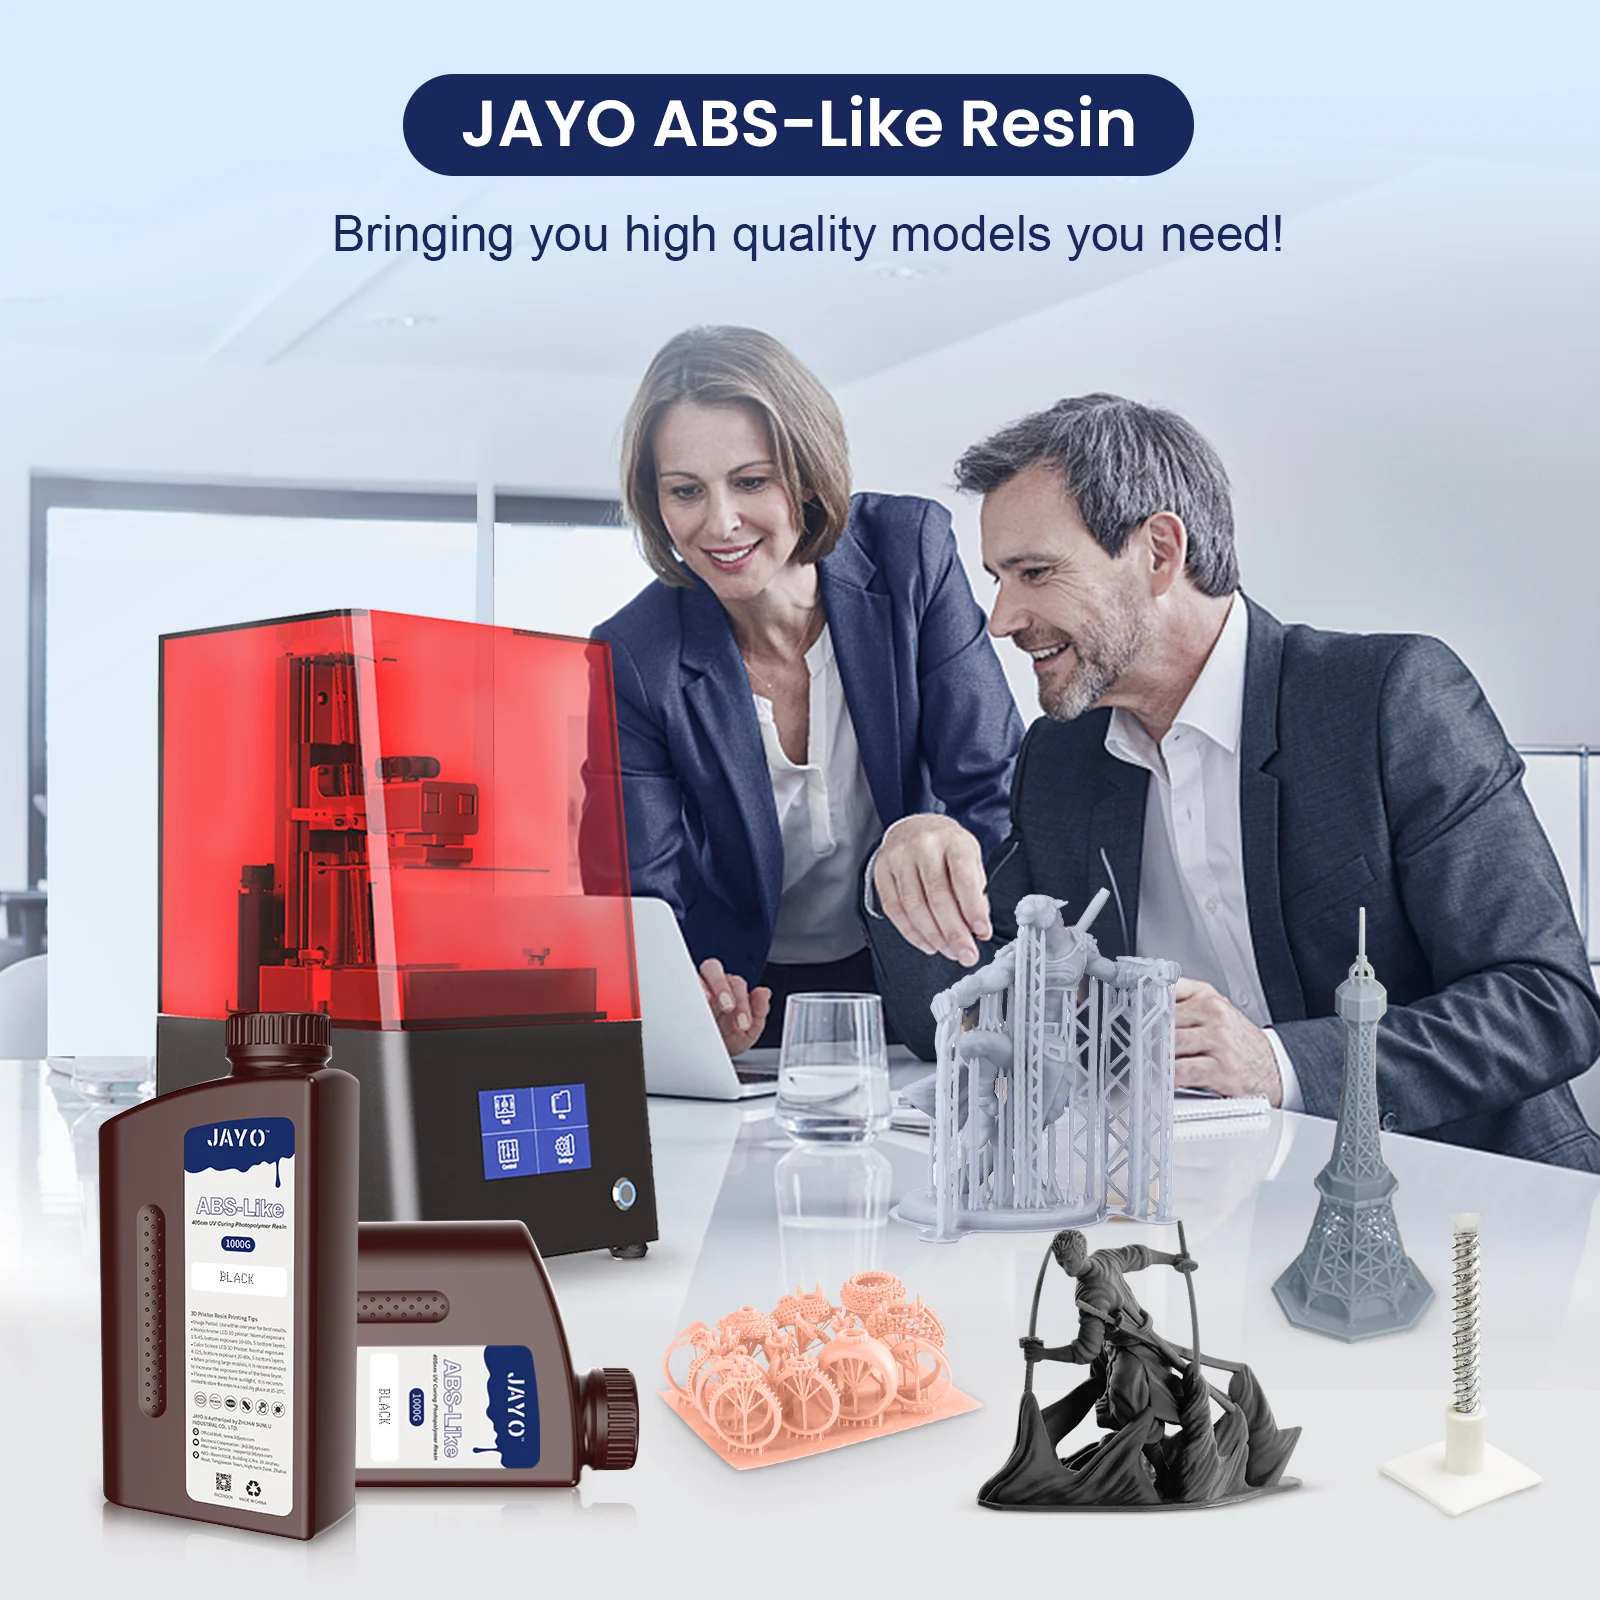 JAYO 5KG Standard/ABS-Like/Plant based/Water-Wash Resin 395-405nm UV Curing  Photopolymer Rapid Resin for LCD/DLP/SLA 3D Printer images - 6